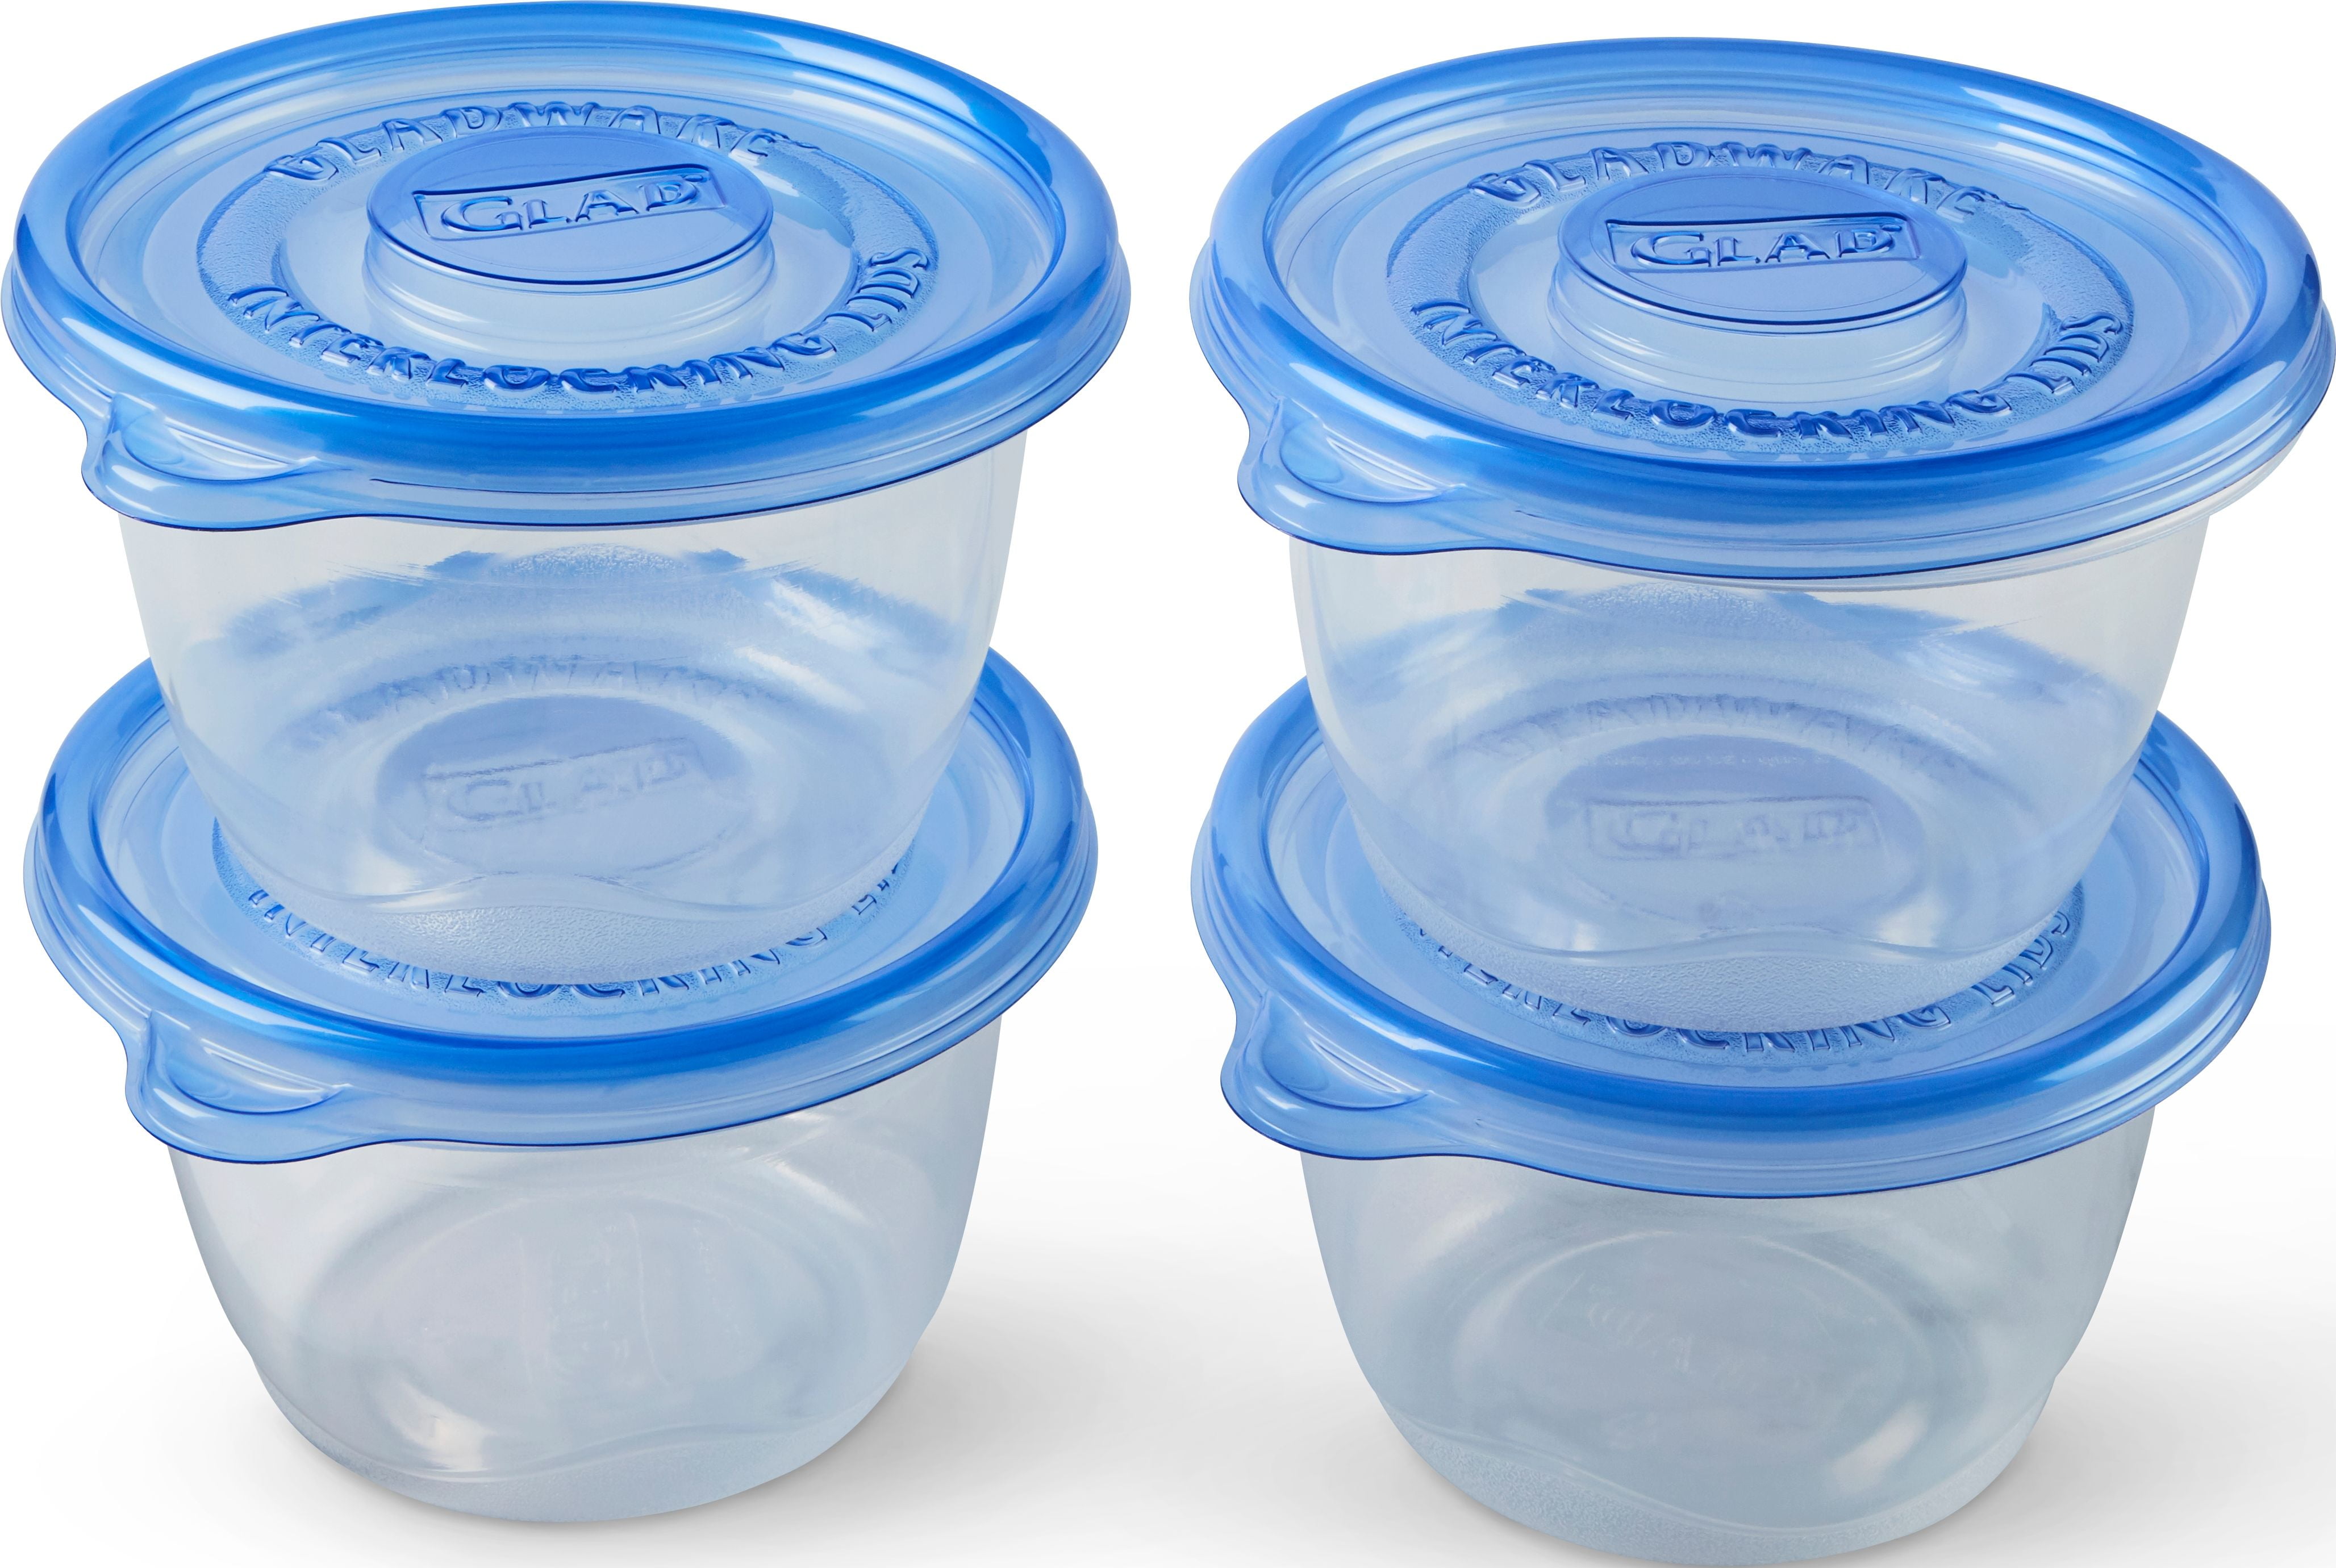 Lot of 4 FOUR Glad 3-1/8 cup 25 ounce Food Storage Containers Blue Covers  Lids